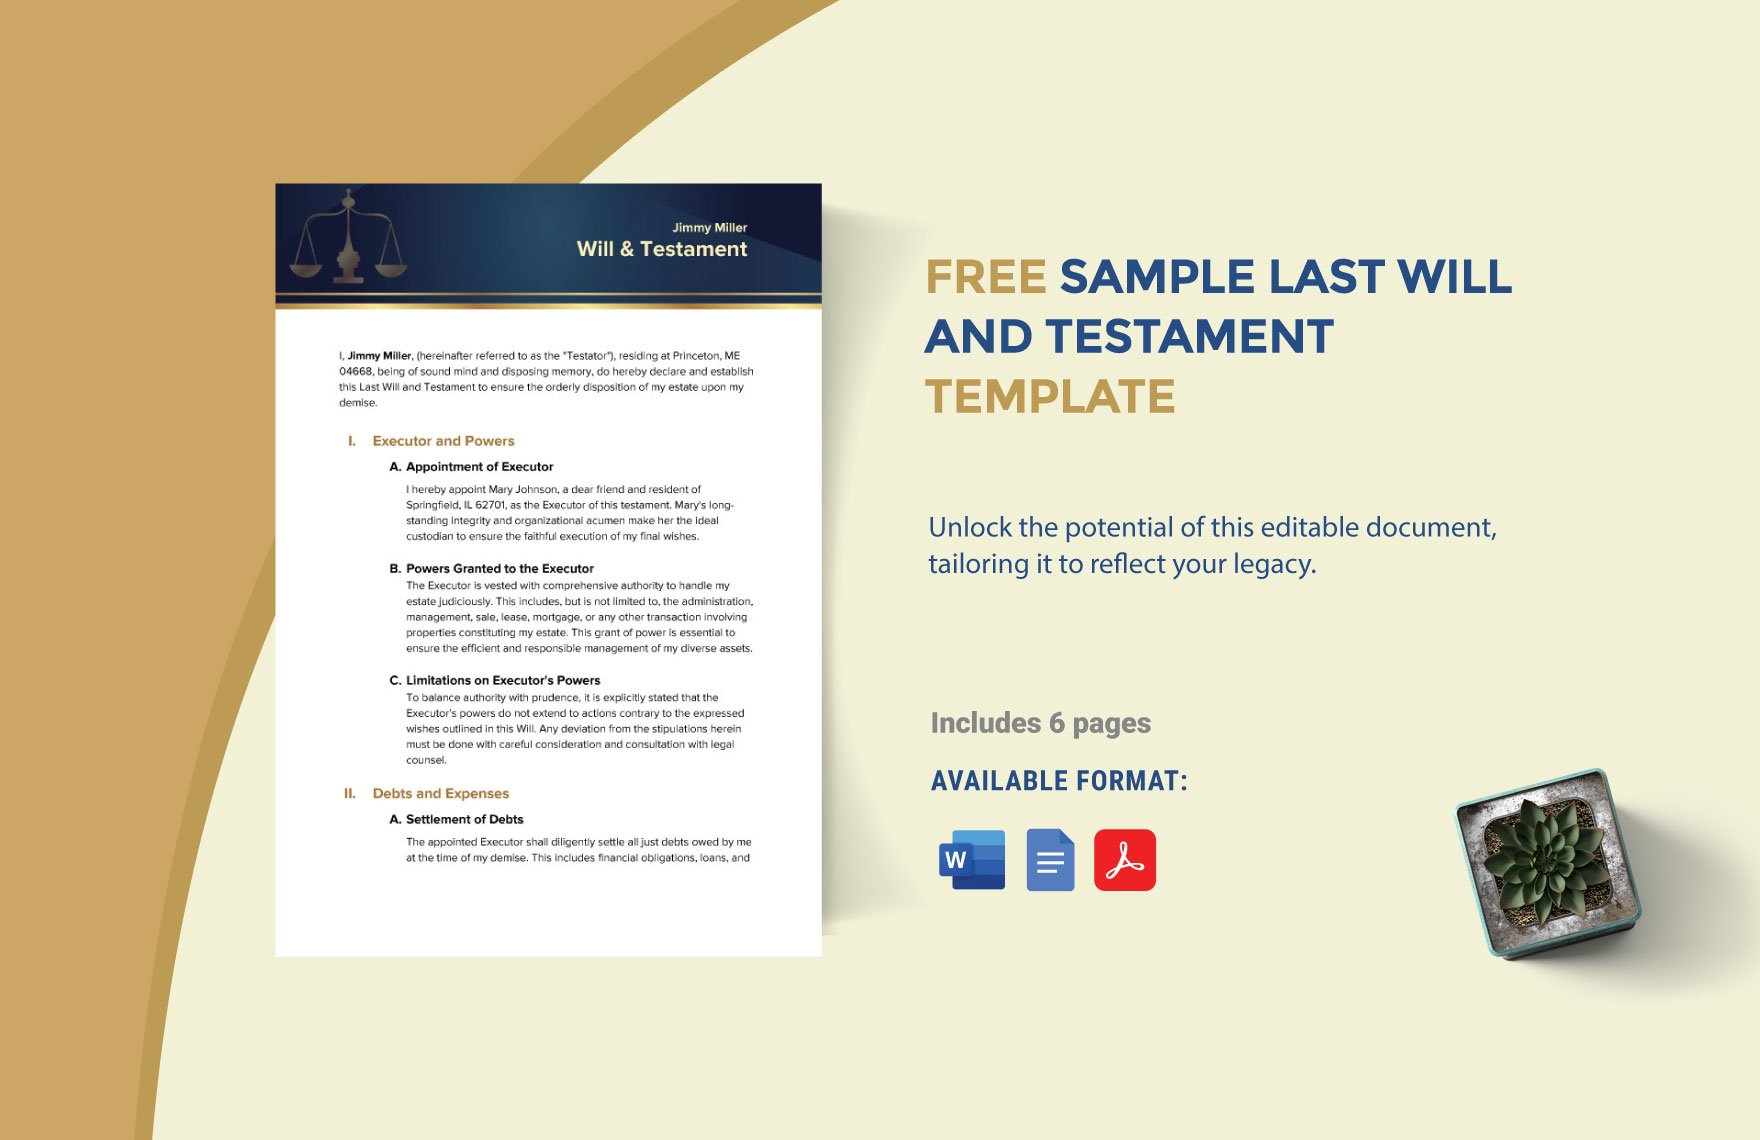 Free Sample Last Will and Testament Template